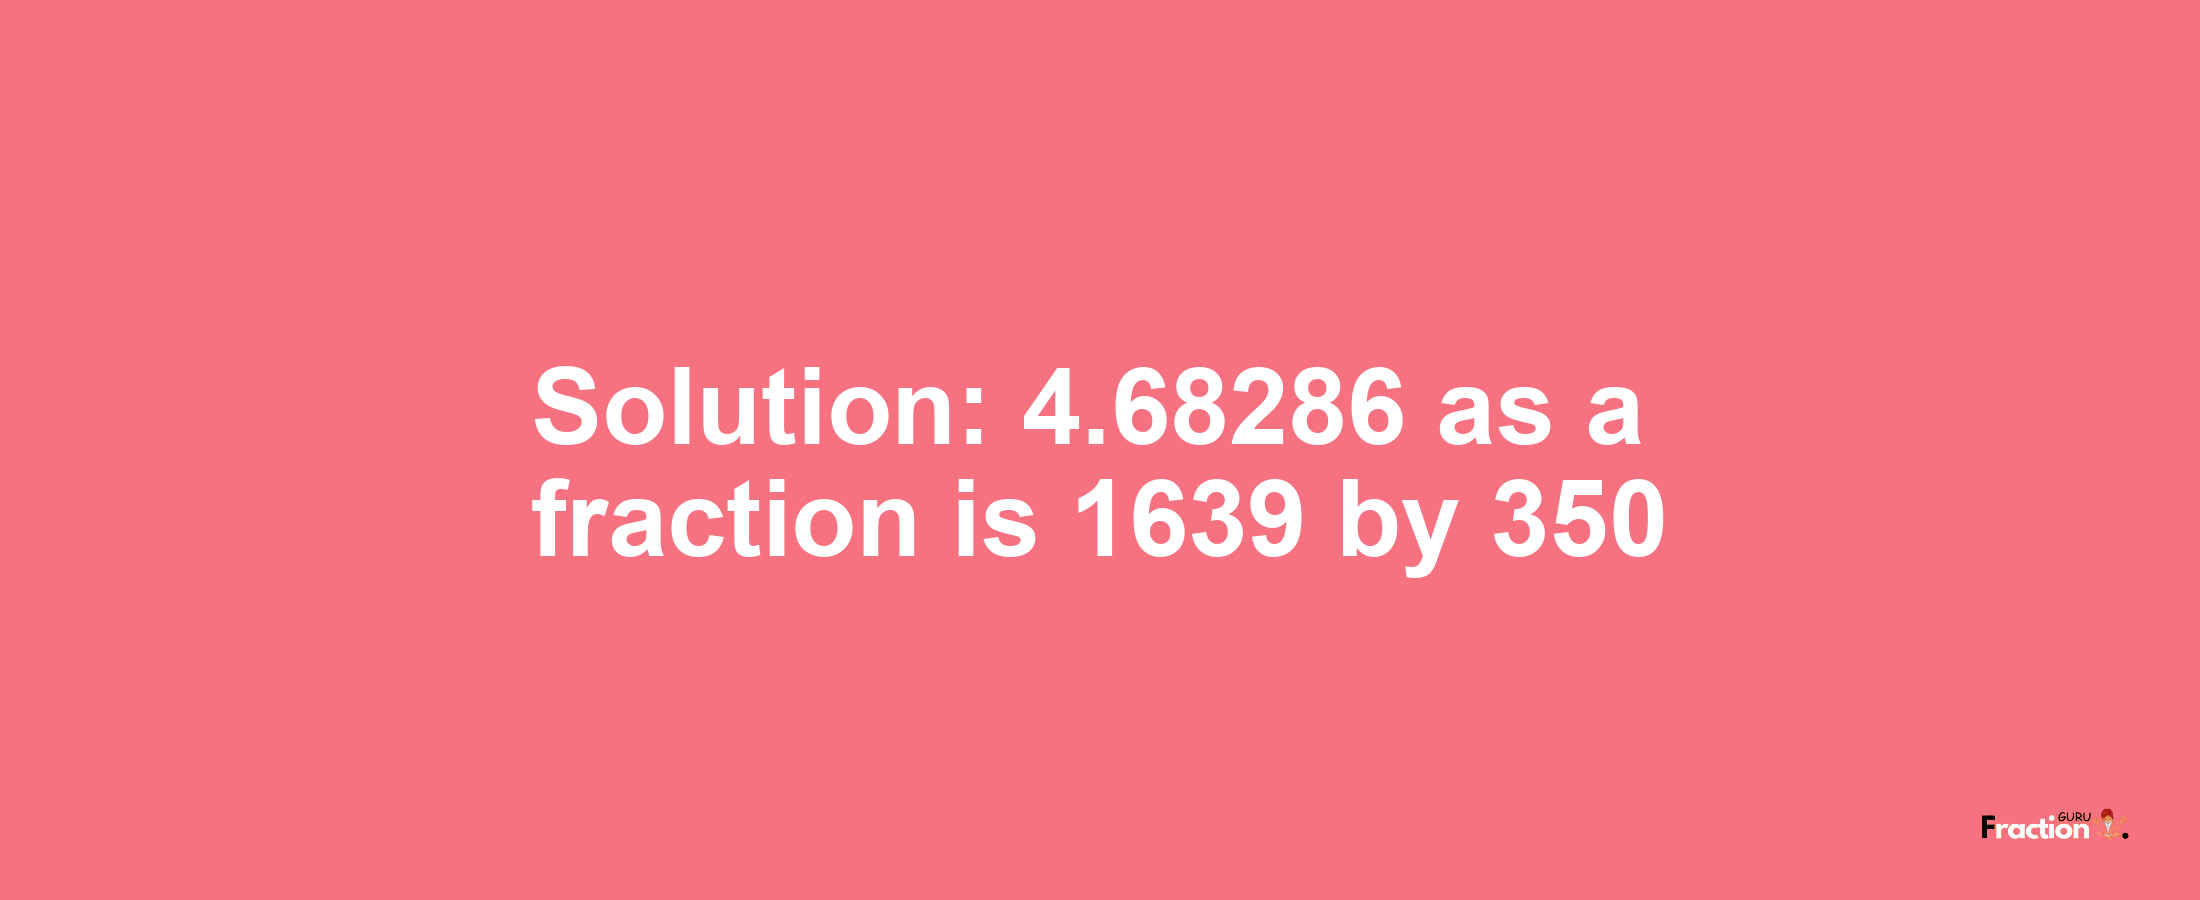 Solution:4.68286 as a fraction is 1639/350